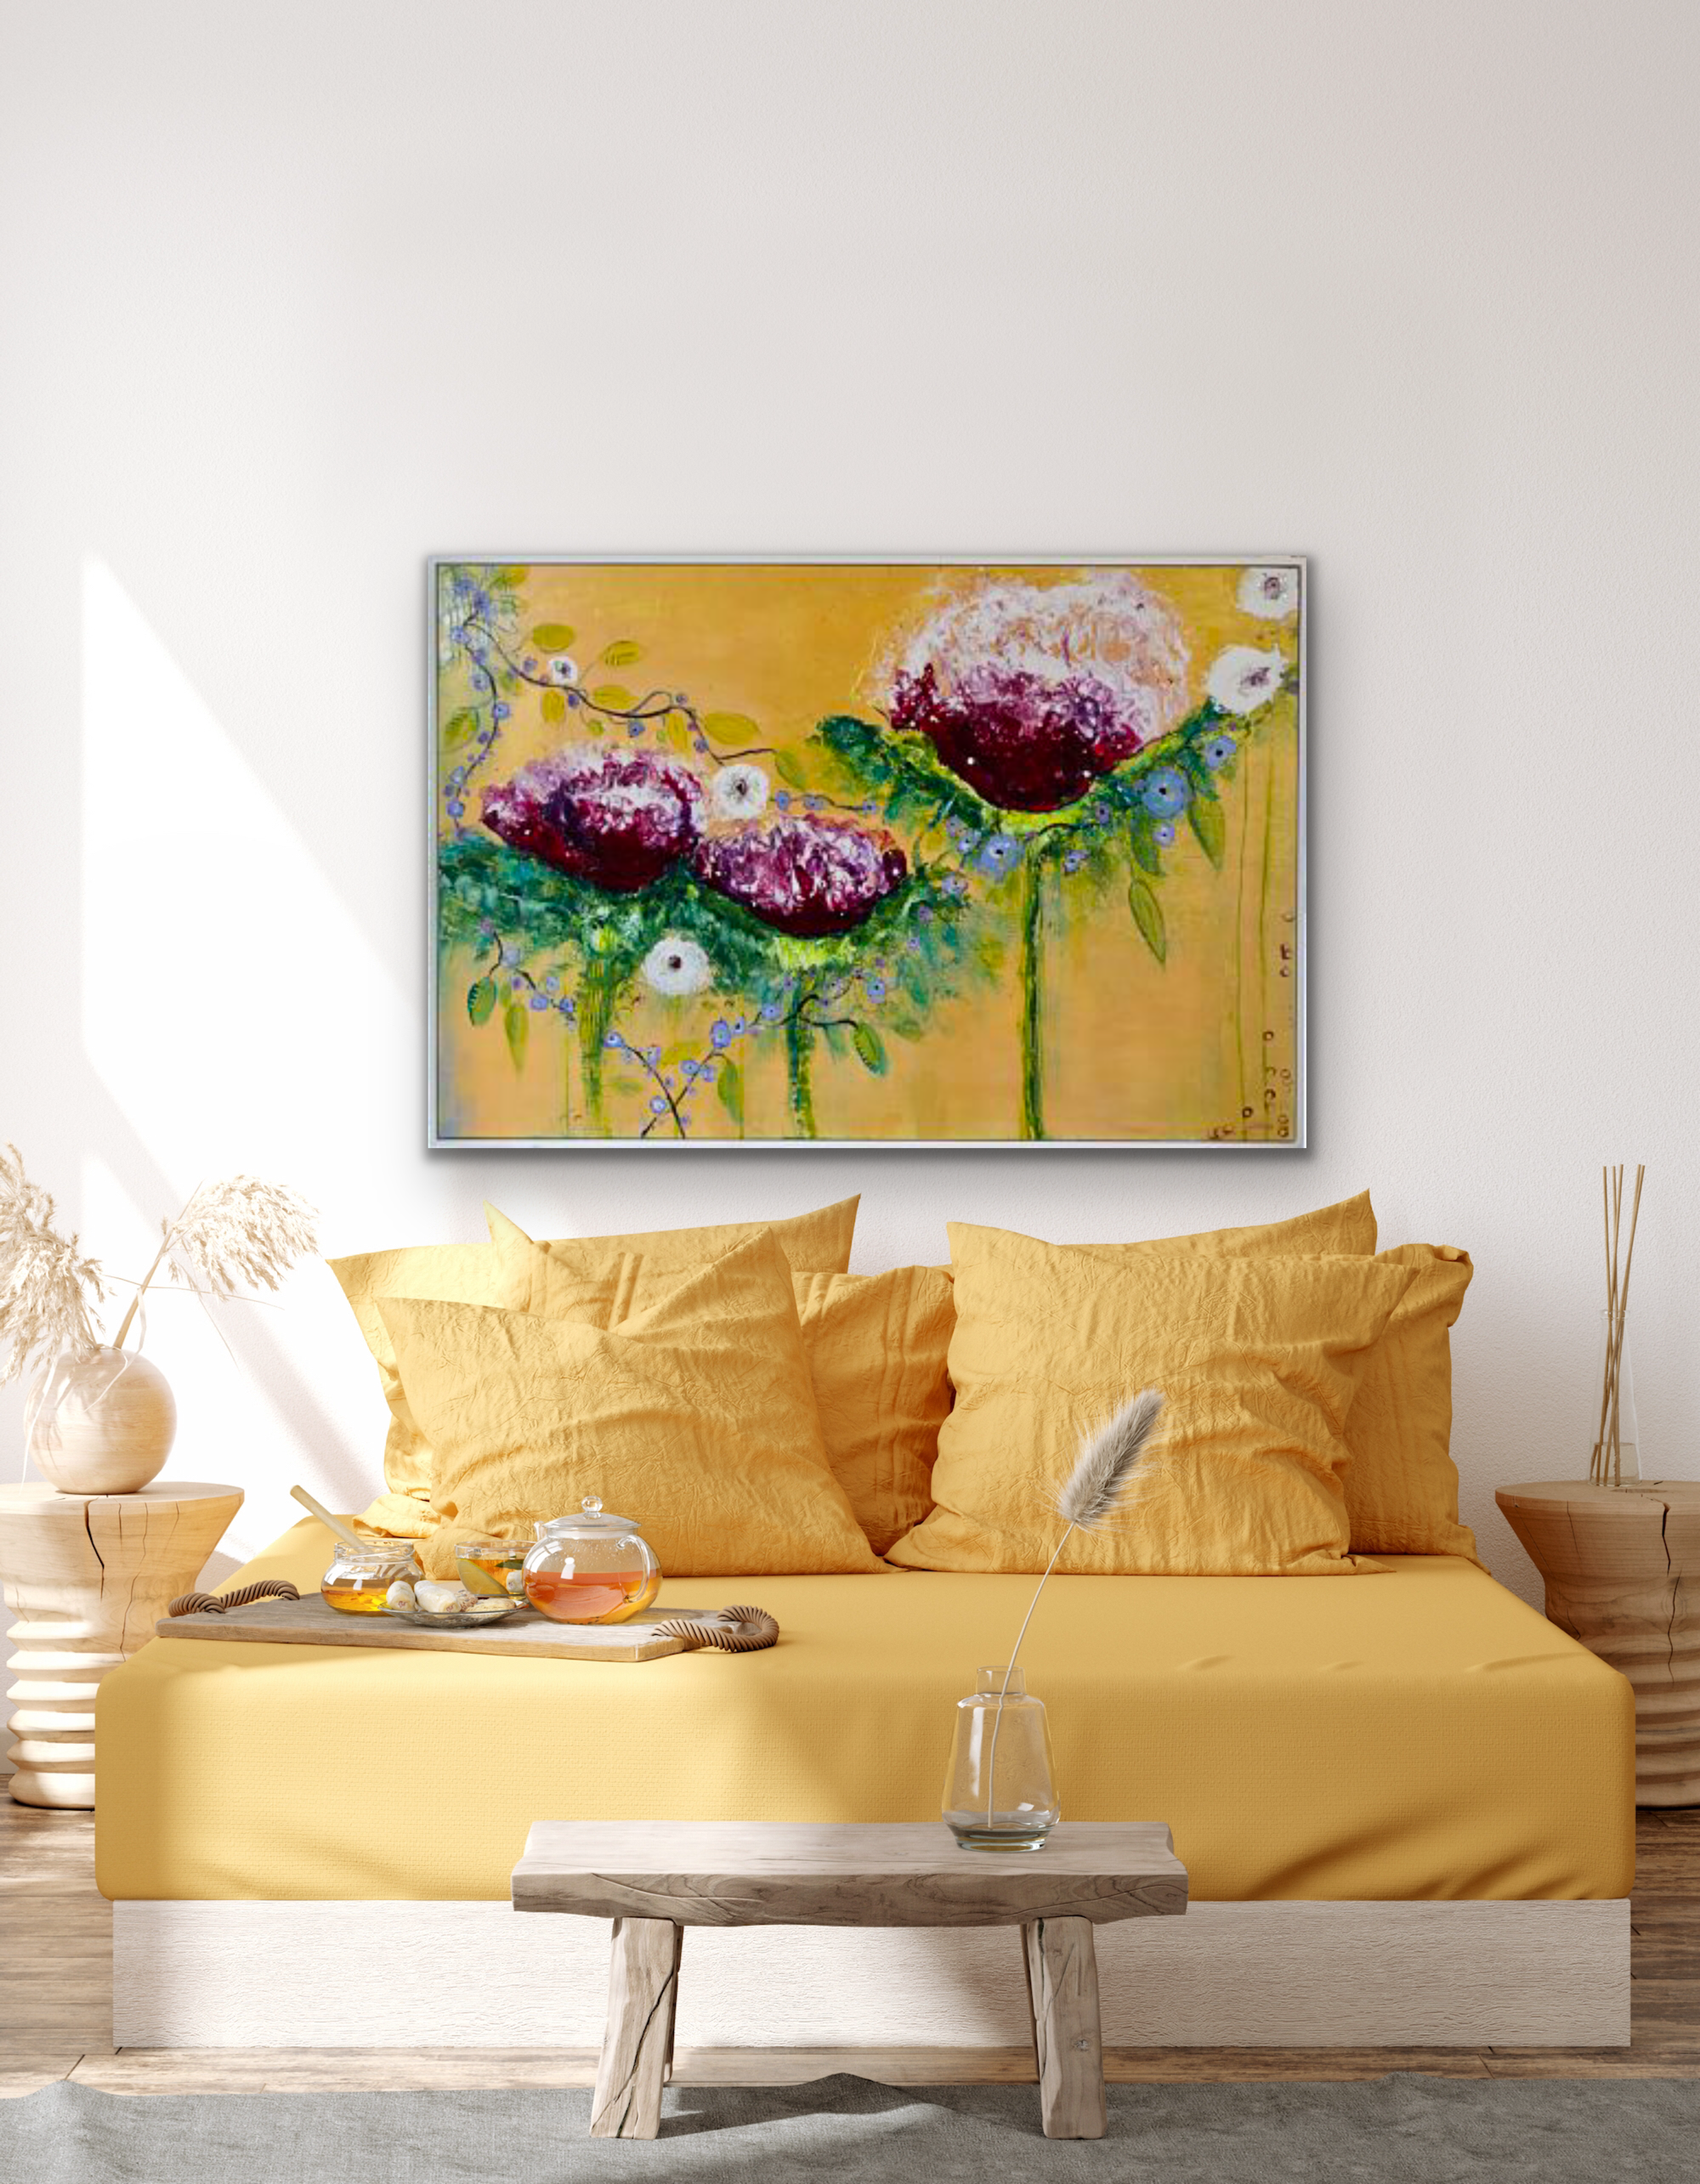 A strong abstract flower original painting for over a sofa or on its own in a dining room or hallway. Large  playful cerise flowers are intertwined with small lavender flowers against a  gold metallic background displayed in a bedroom setting.